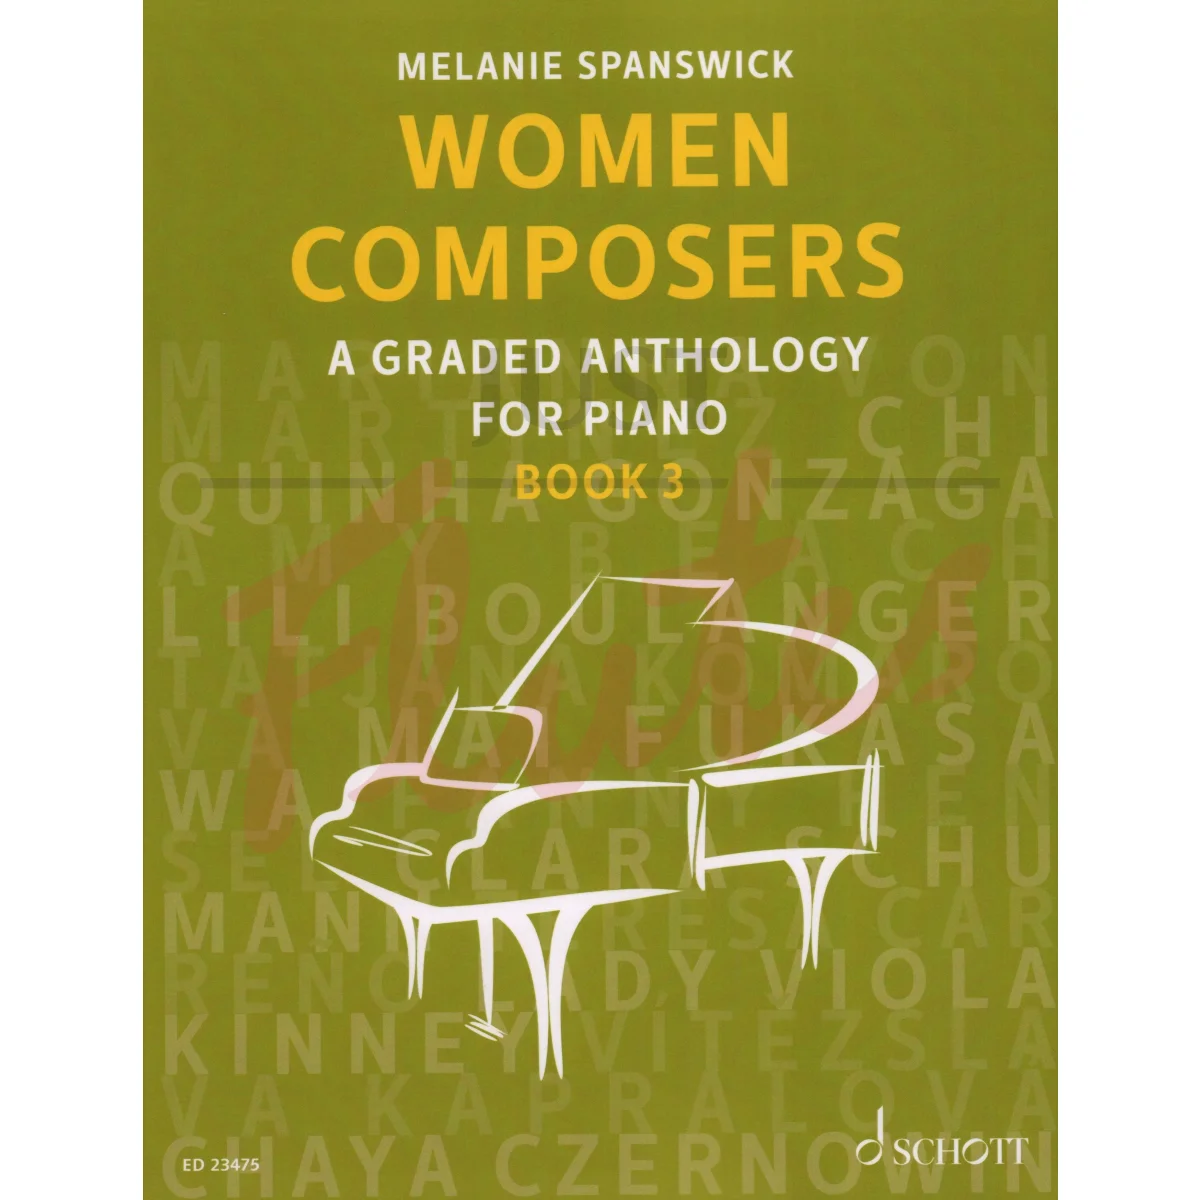 Women Composers: A Graded Anthology for Piano, Book 3